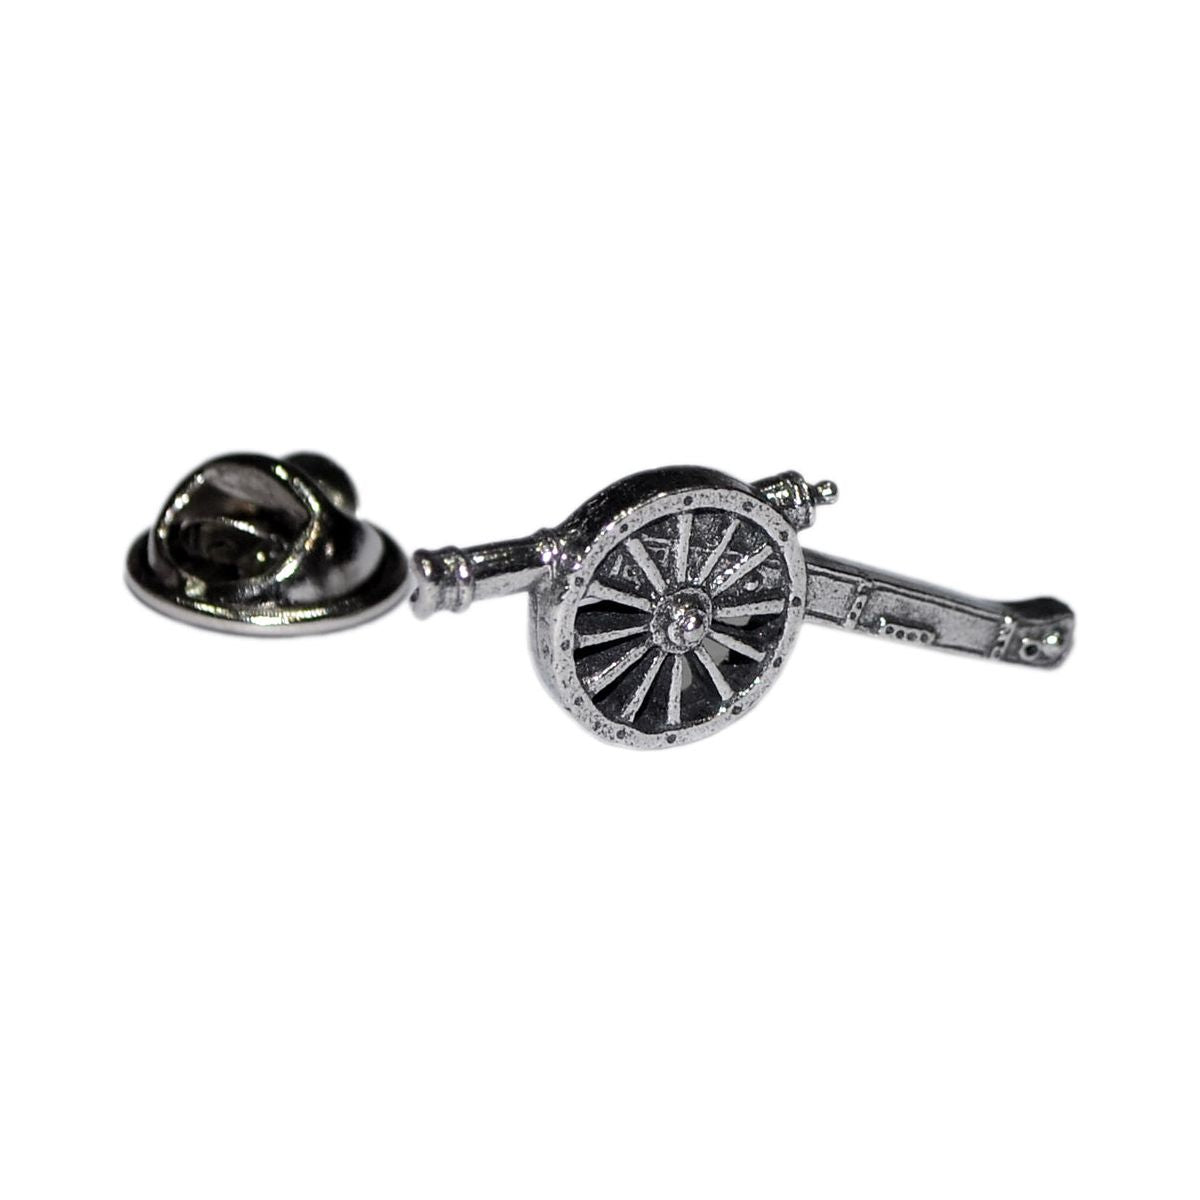 Battle of Waterloo Cannon Pewter Lapel Pin Badge - Ashton and Finch